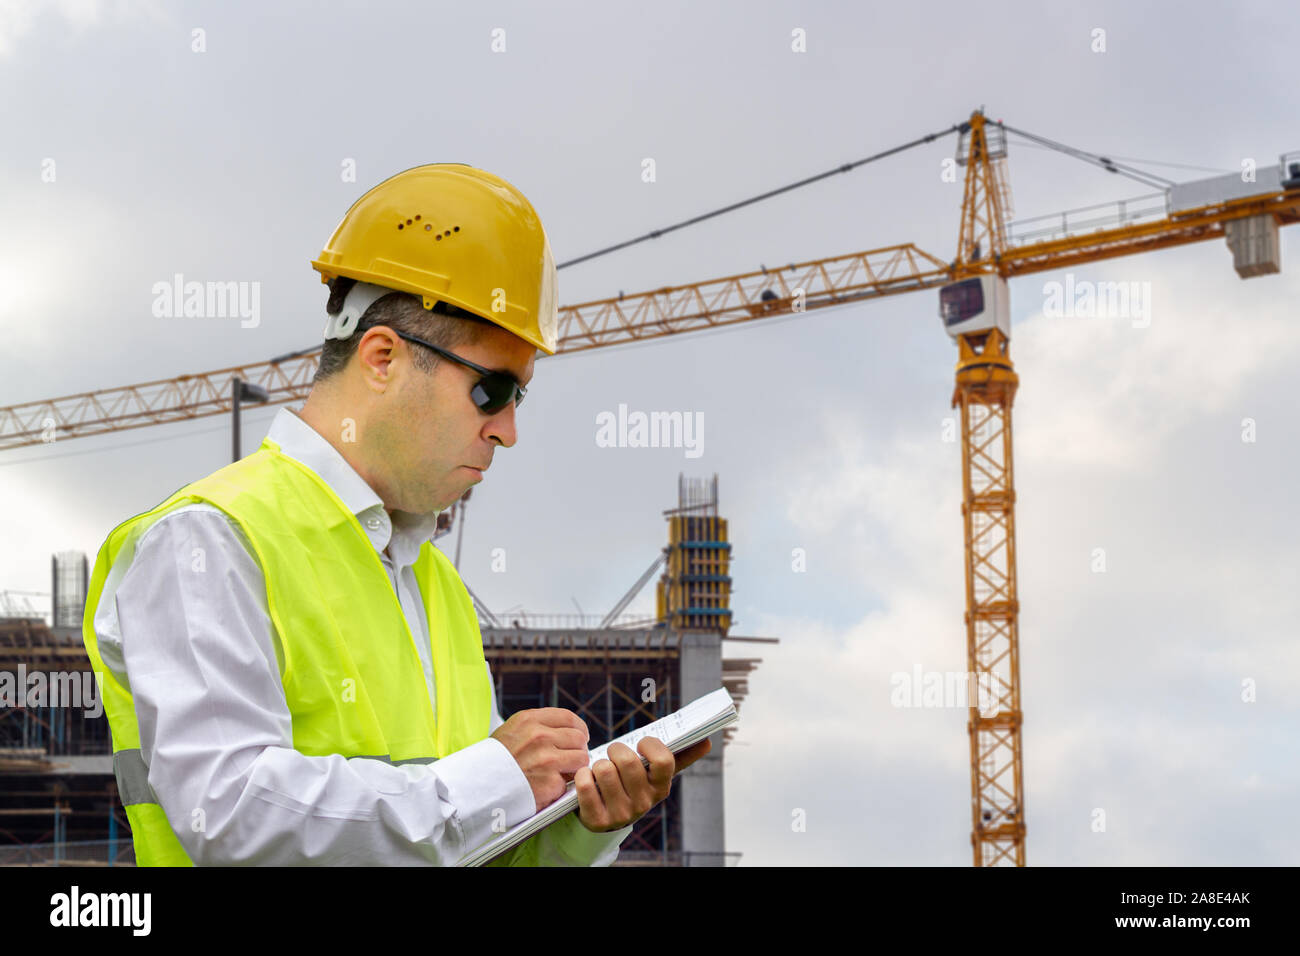 Construction worker man with safety helmet and vest works at construction site. Concept of people working in industrial field Stock Photo